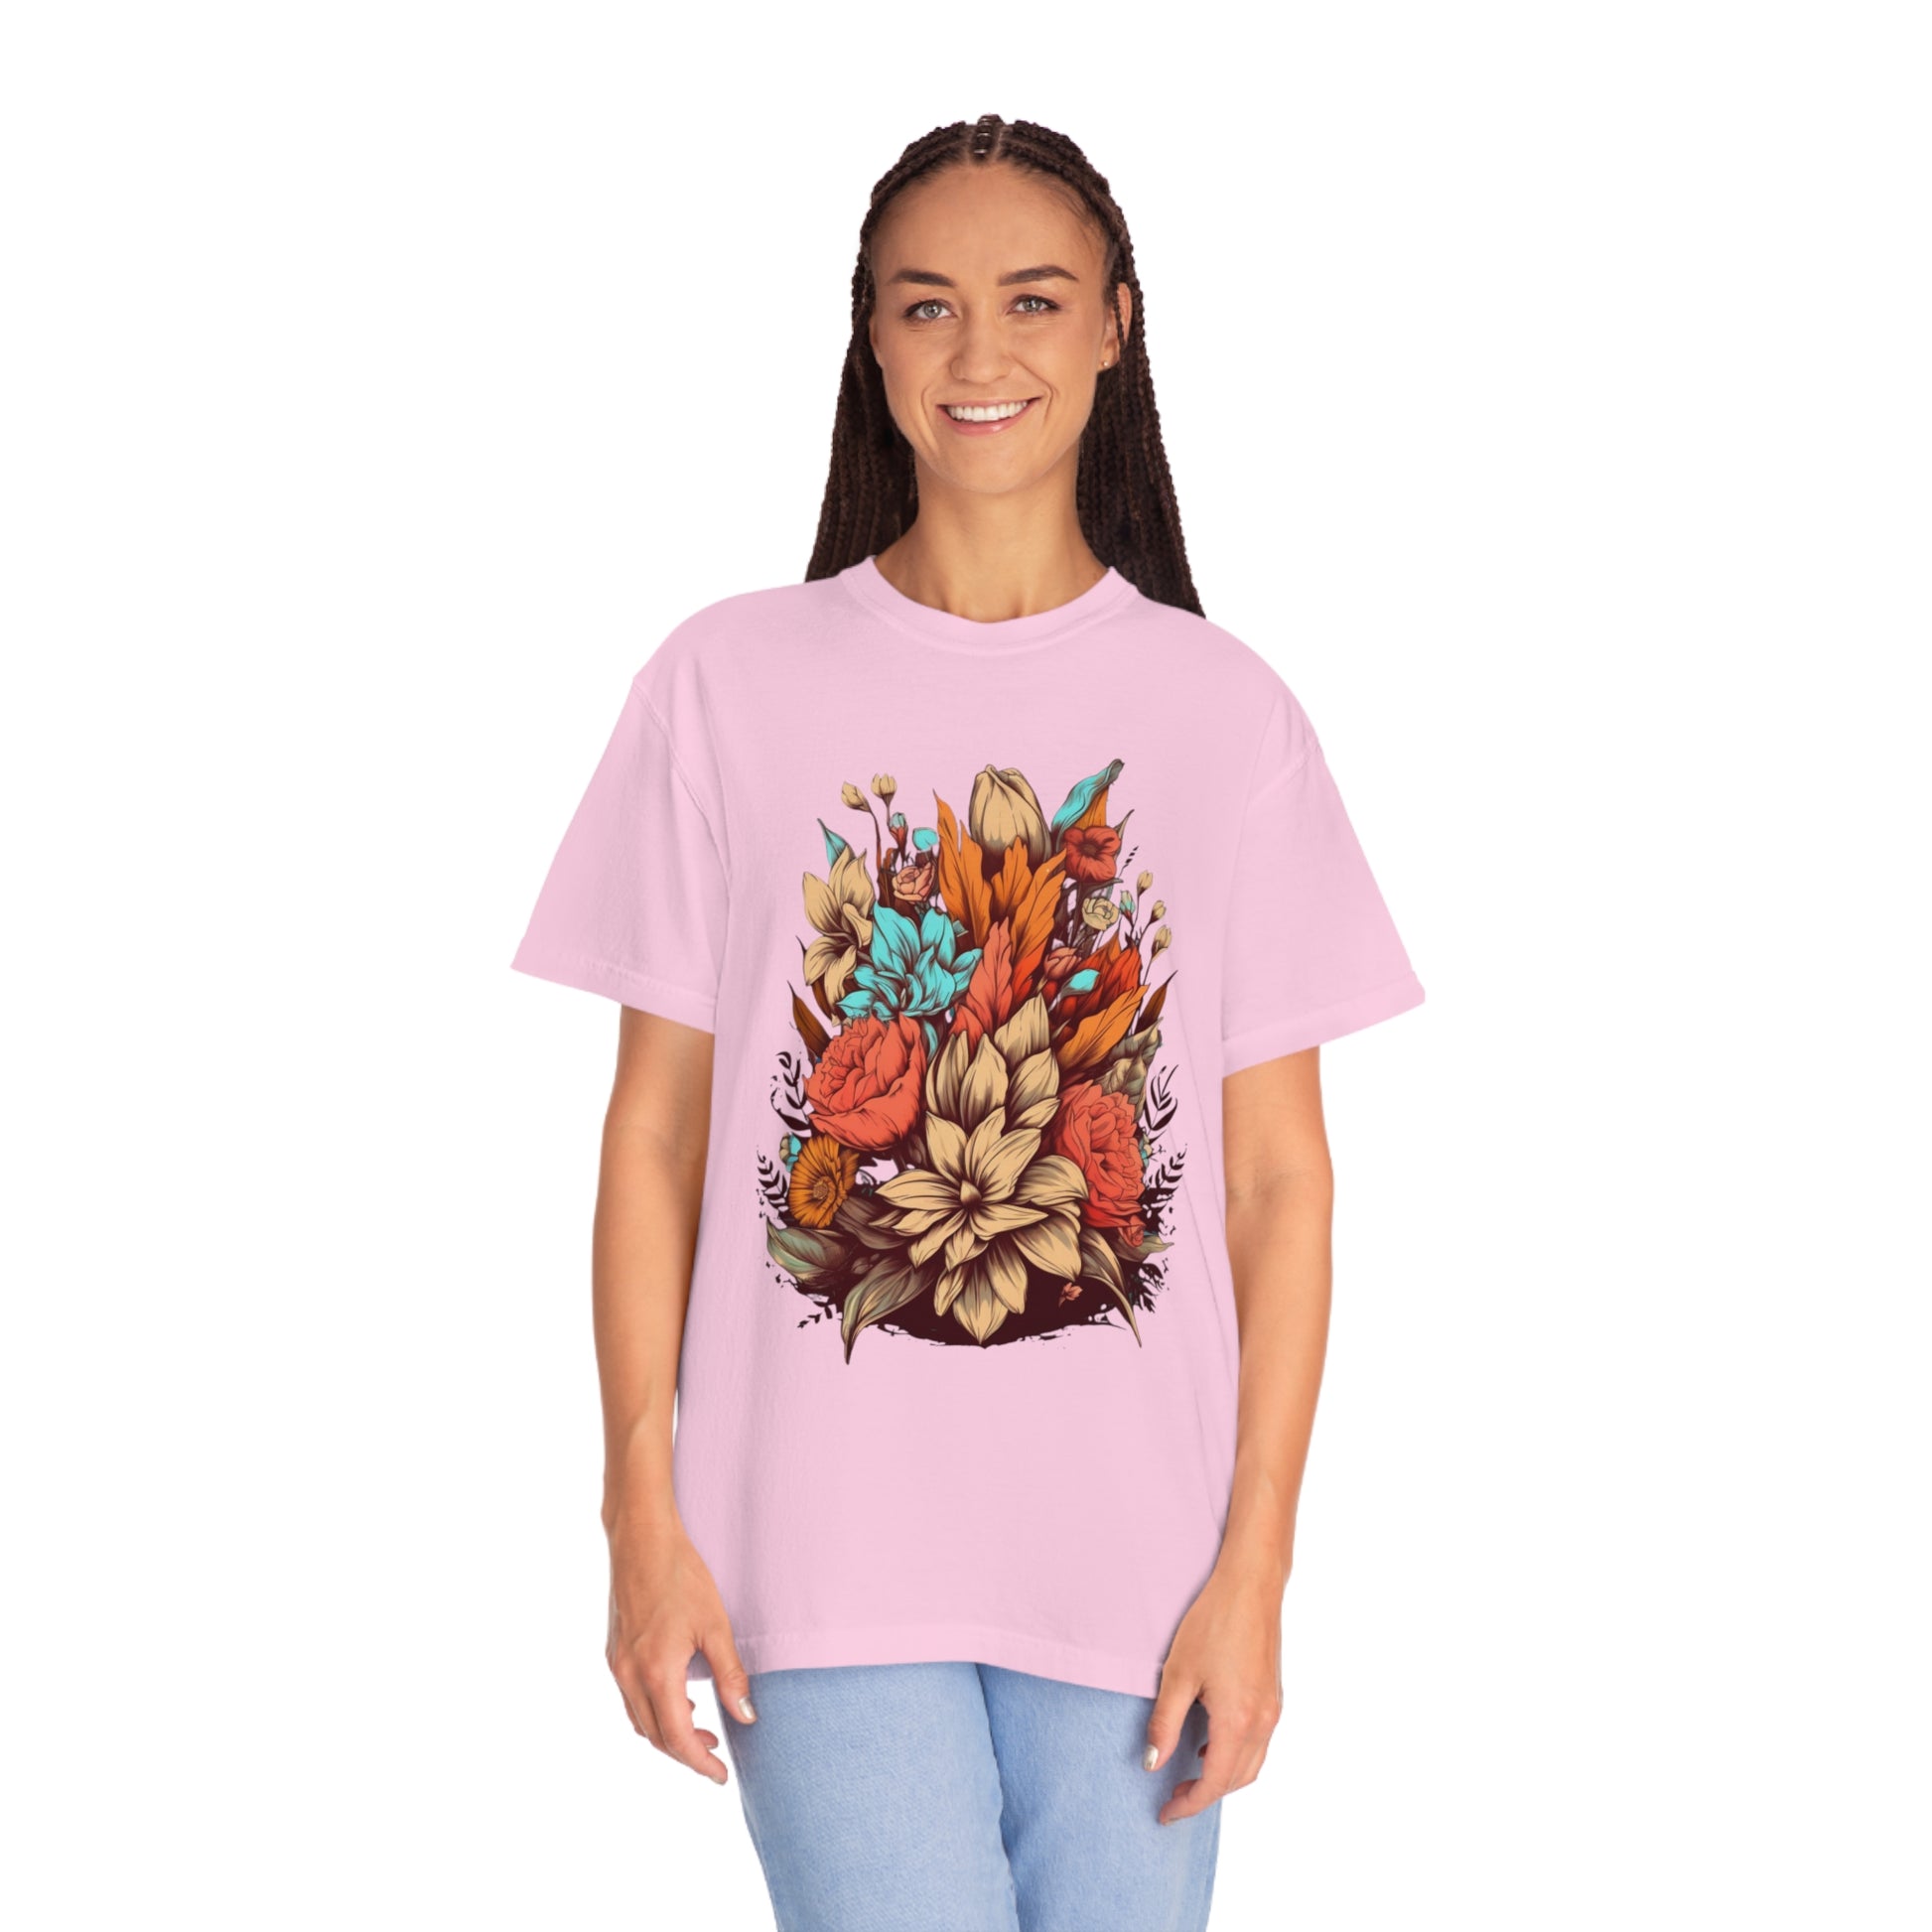 Boho Wildflowers Floral Nature Shirt | Garment Dyed Boho Tee for Nature Lovers T-Shirt Blossom M 